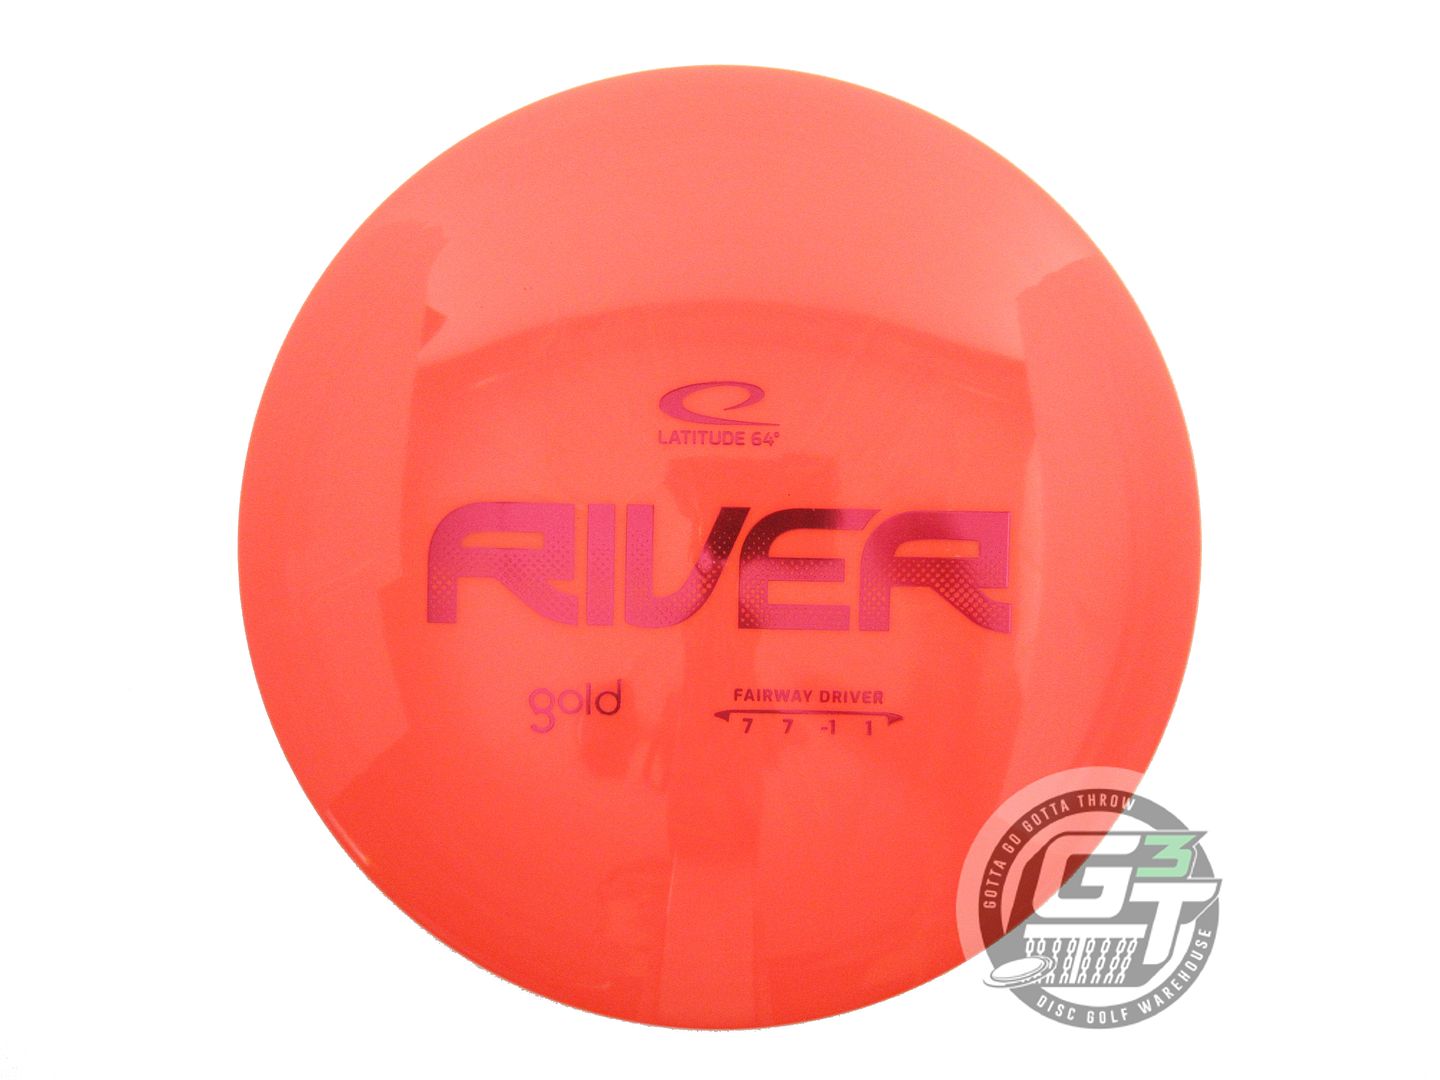 Latitude 64 Gold Line River Fairway Driver Golf Disc (Individually Listed)